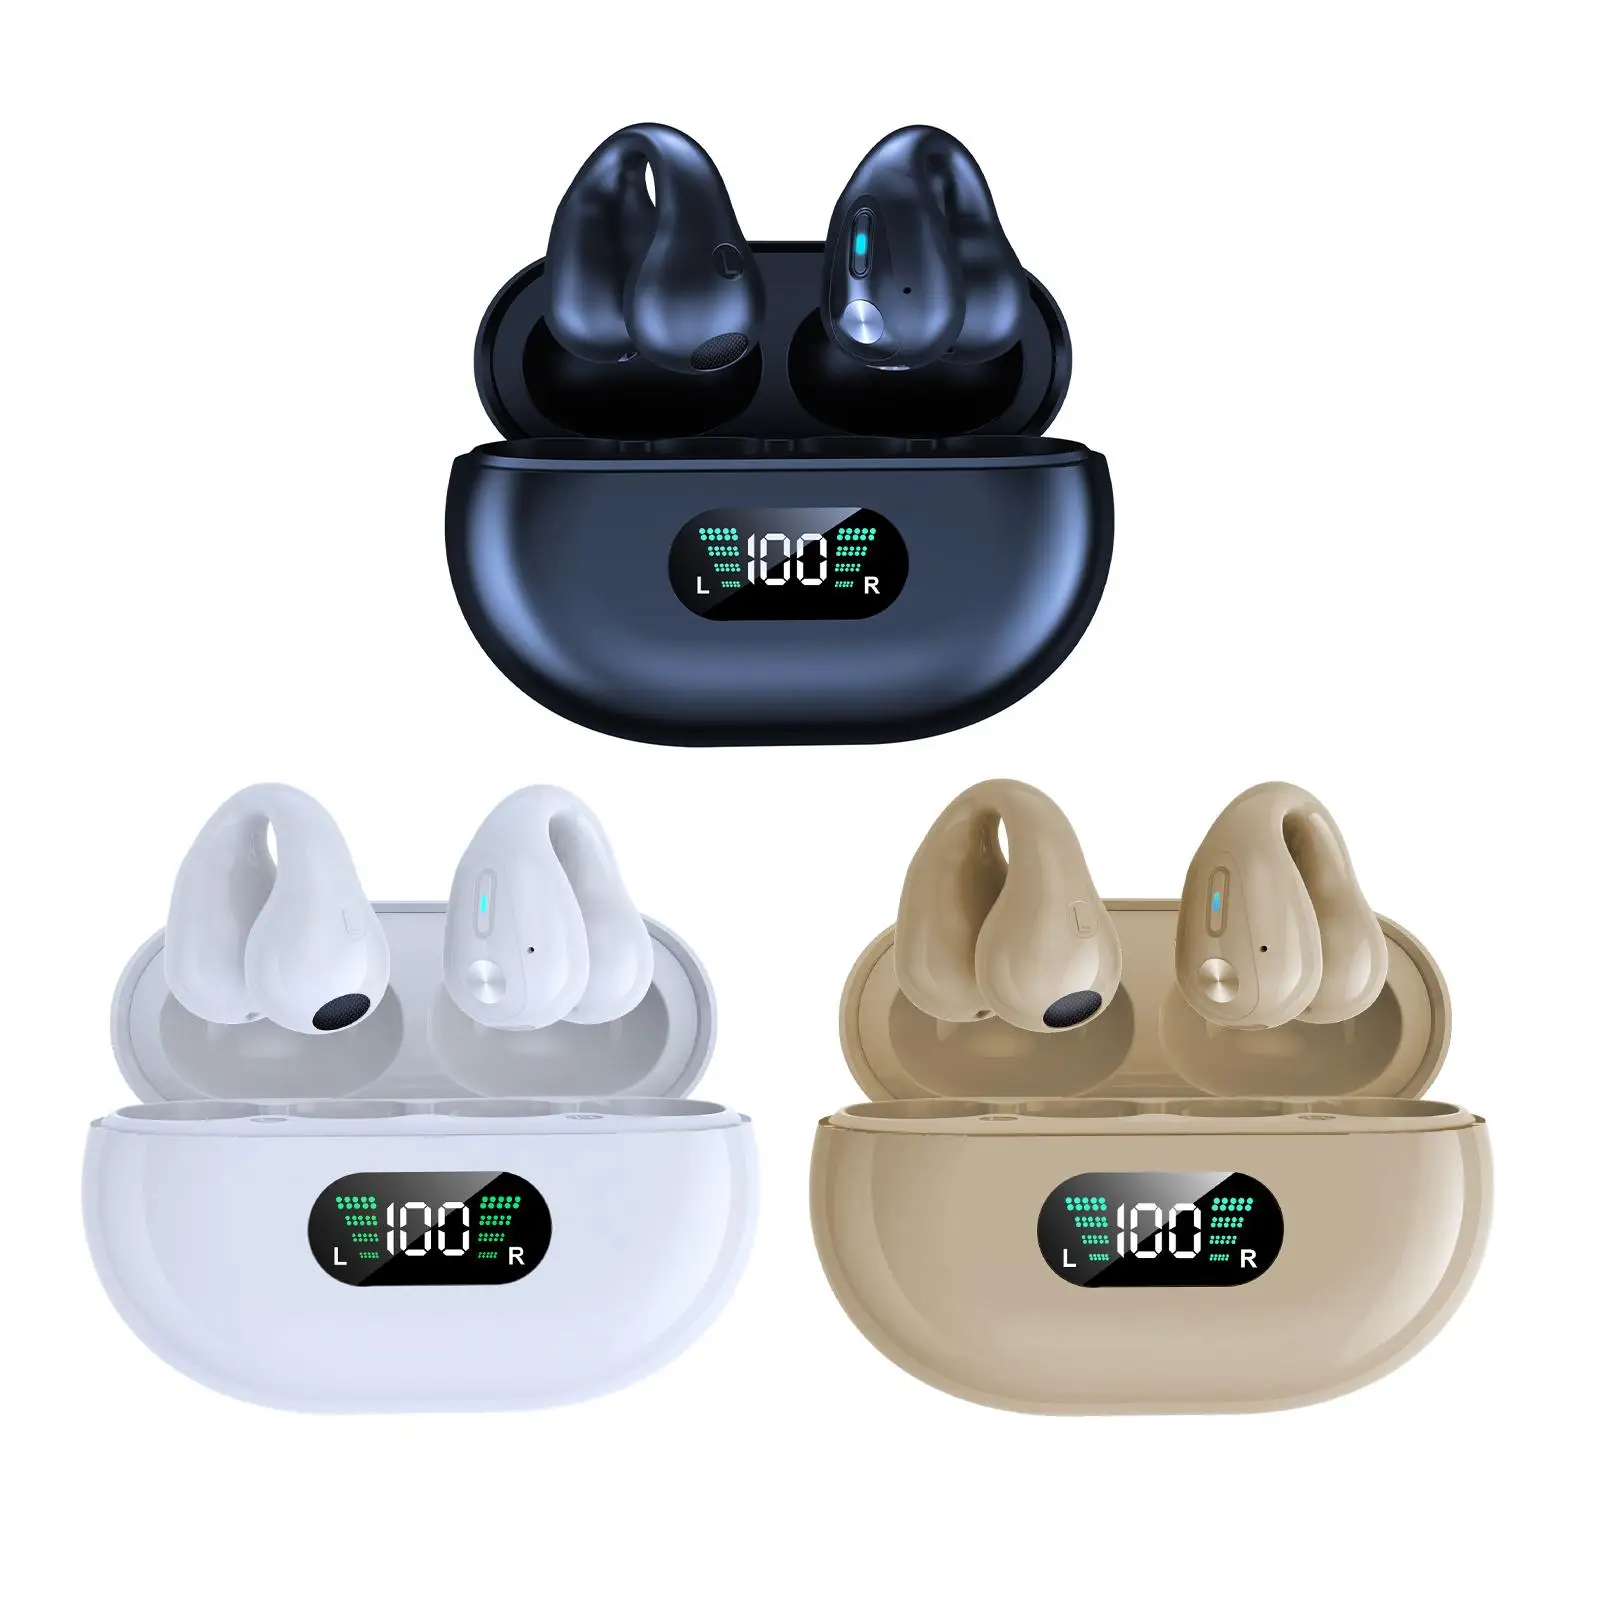 Auto Pairing Ear Clip Headphones Noise Cancelling Headsets for Running Yoga Sports Gym